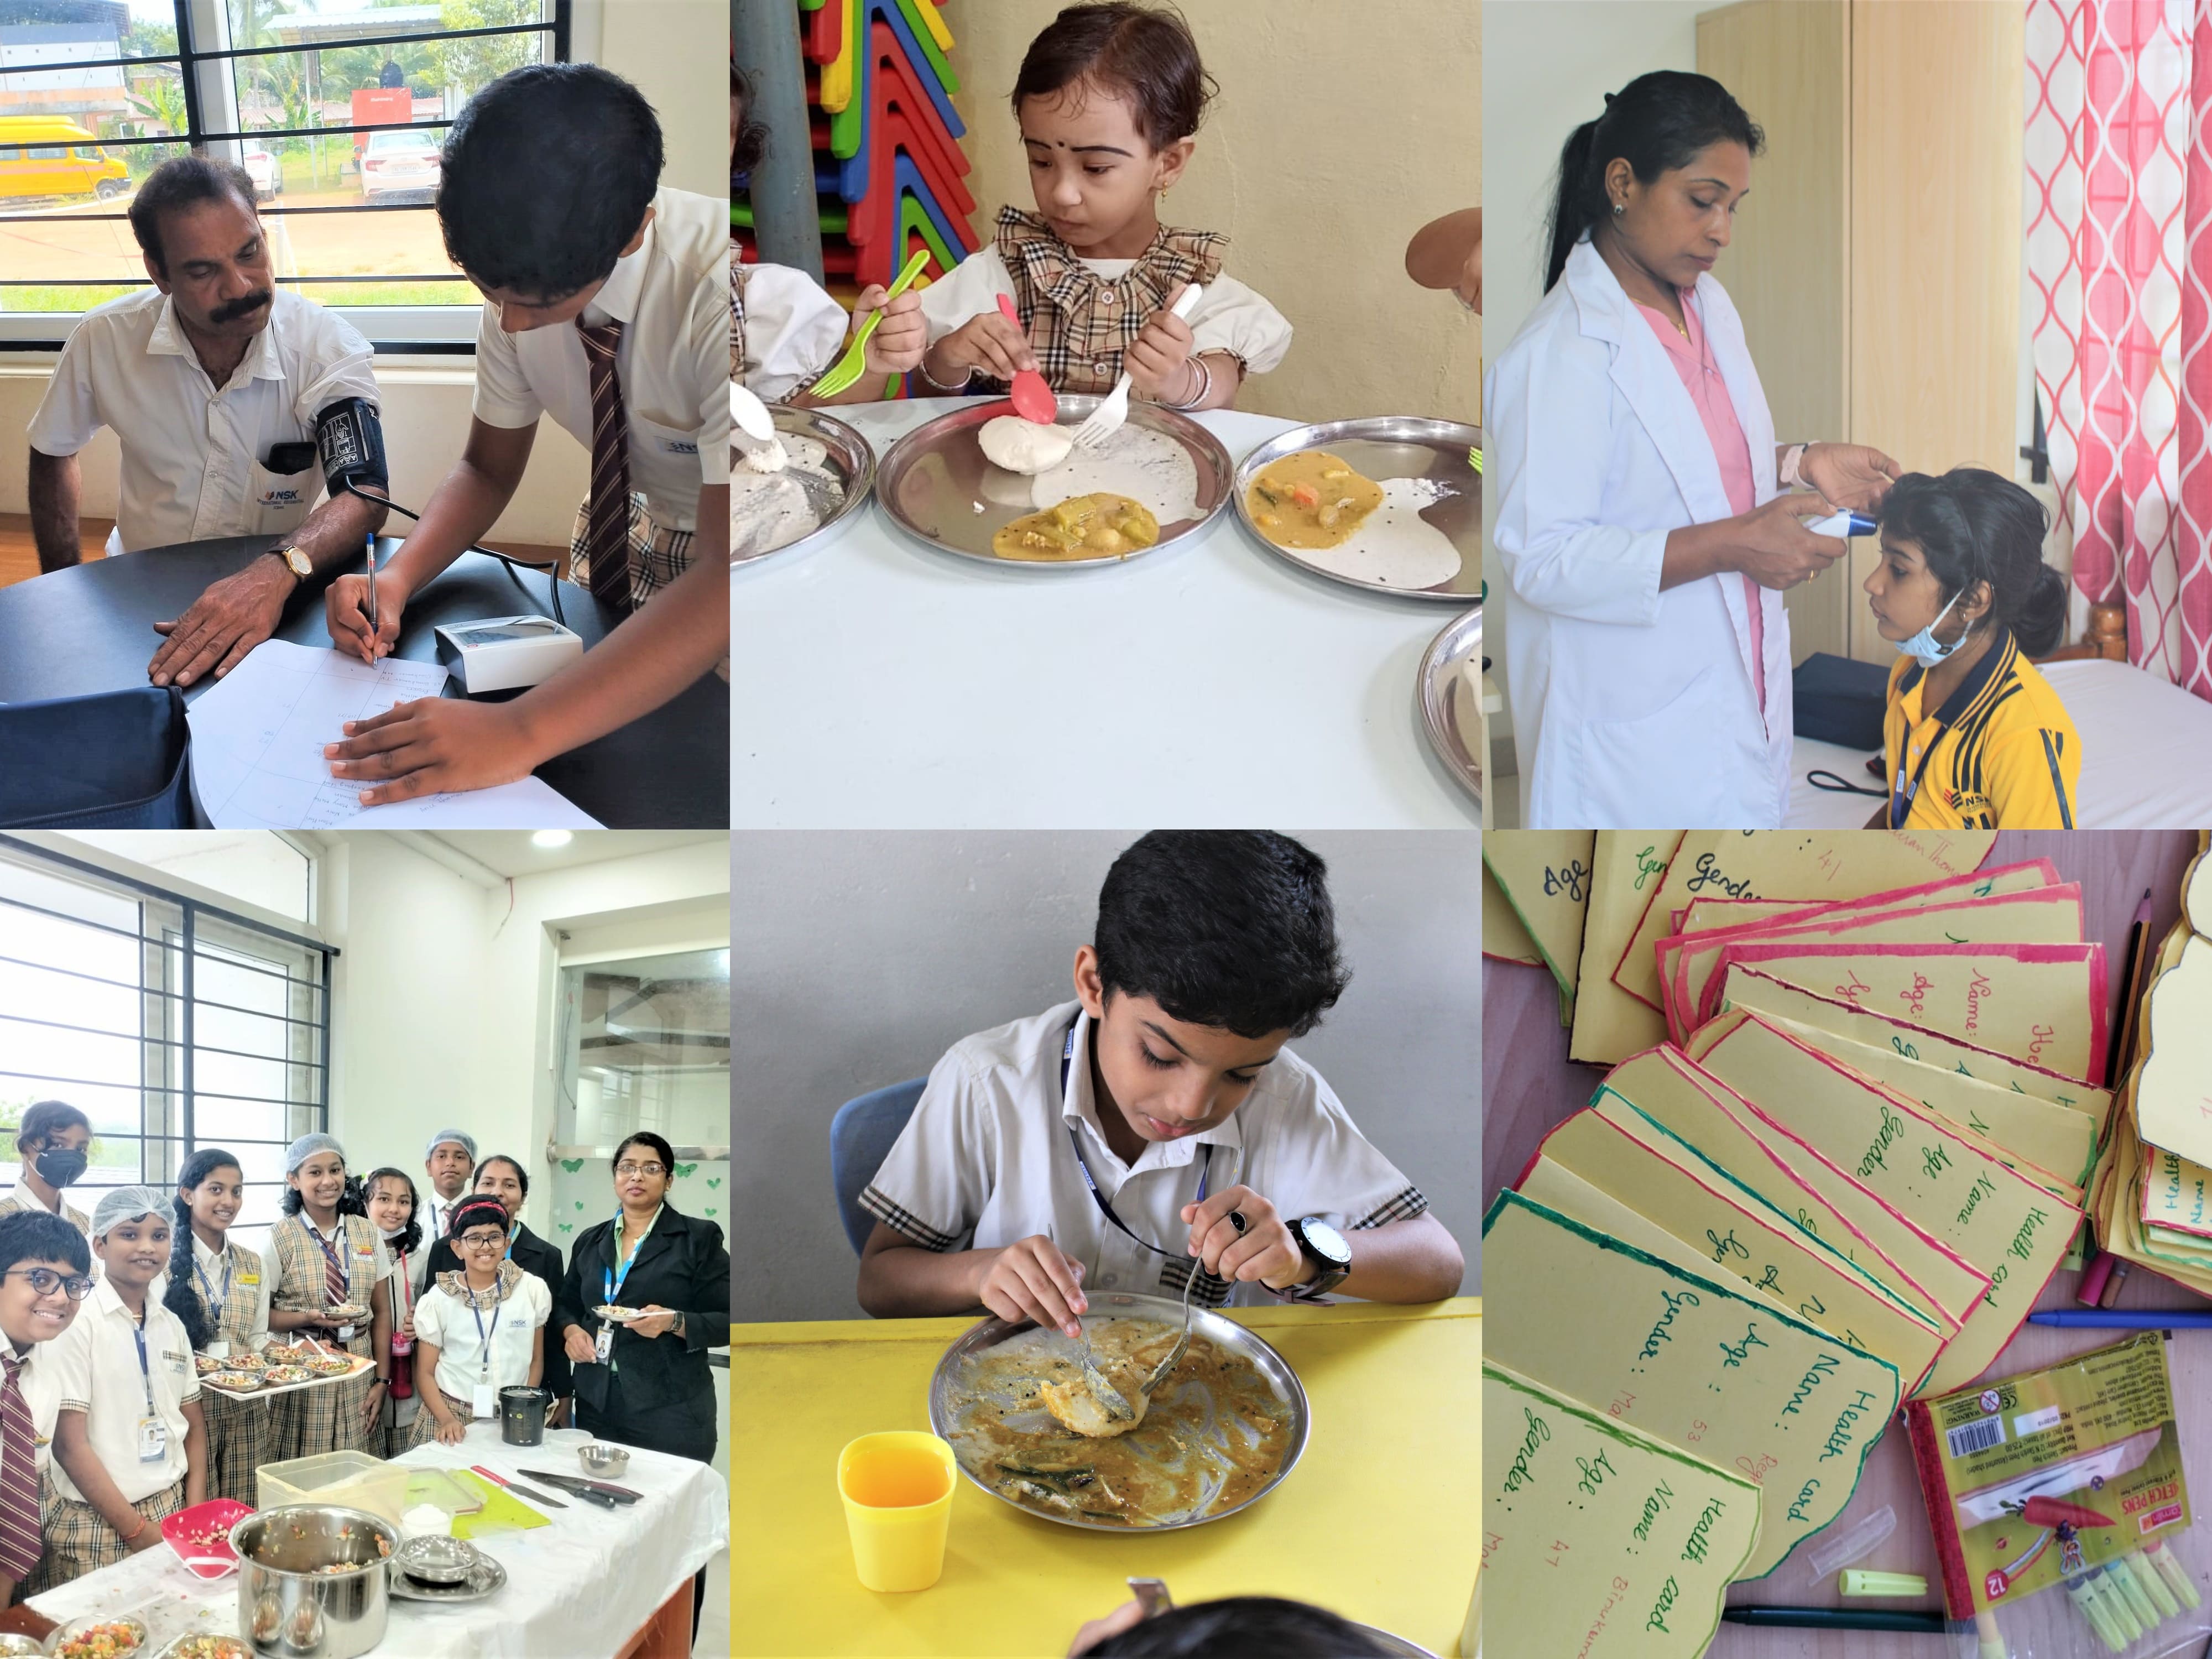 health and wellness activities for students at nsk